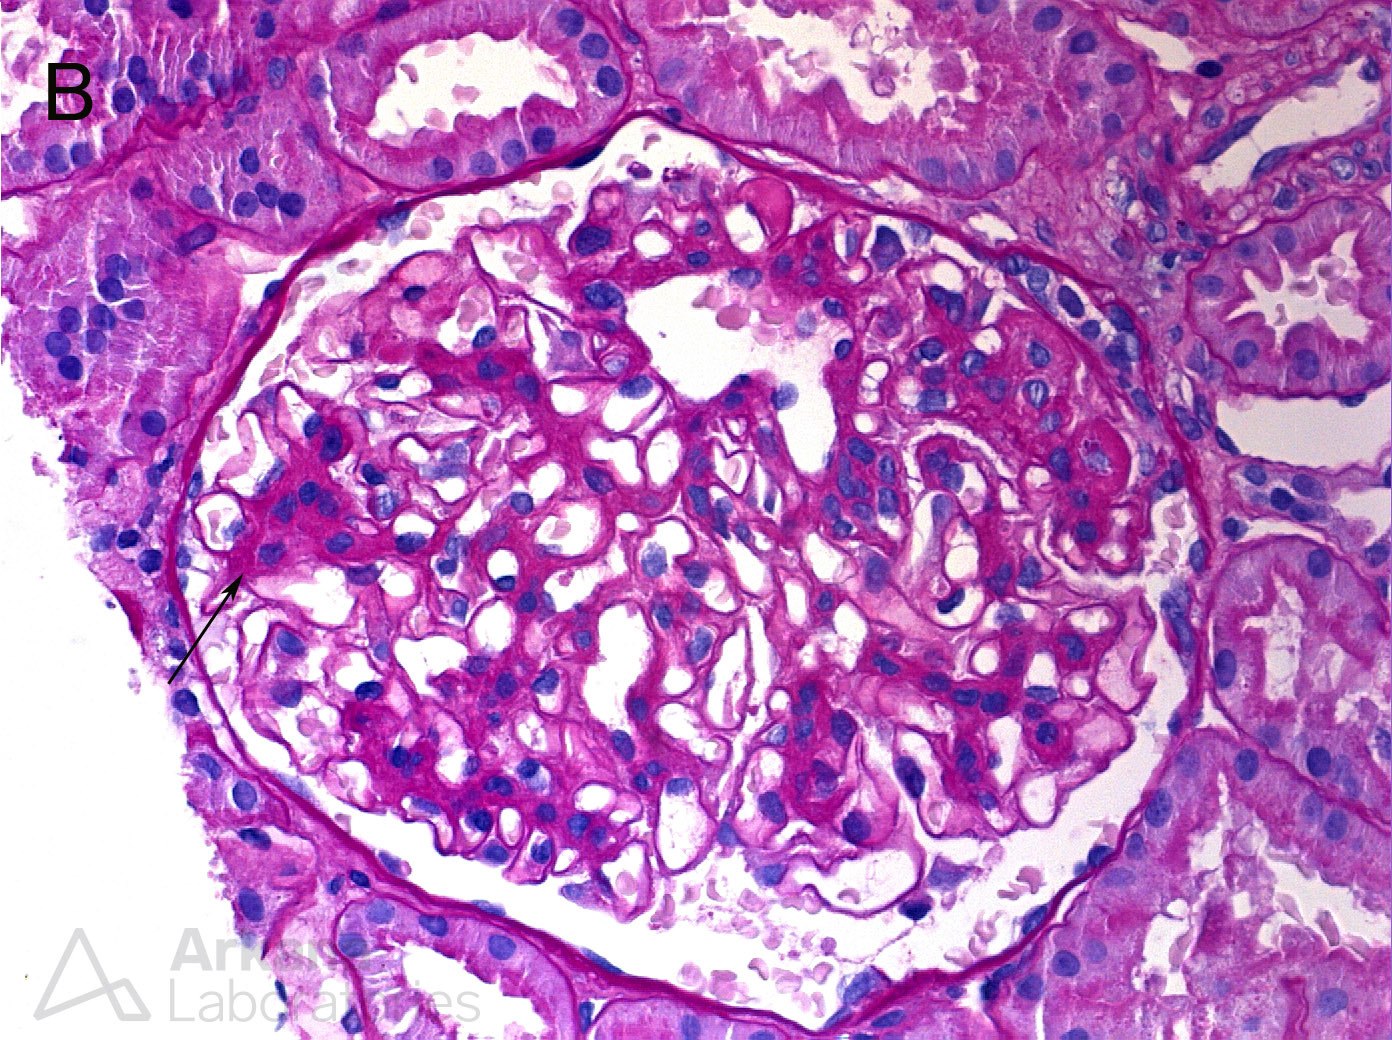 mesangial hypercellularity in glomerulus